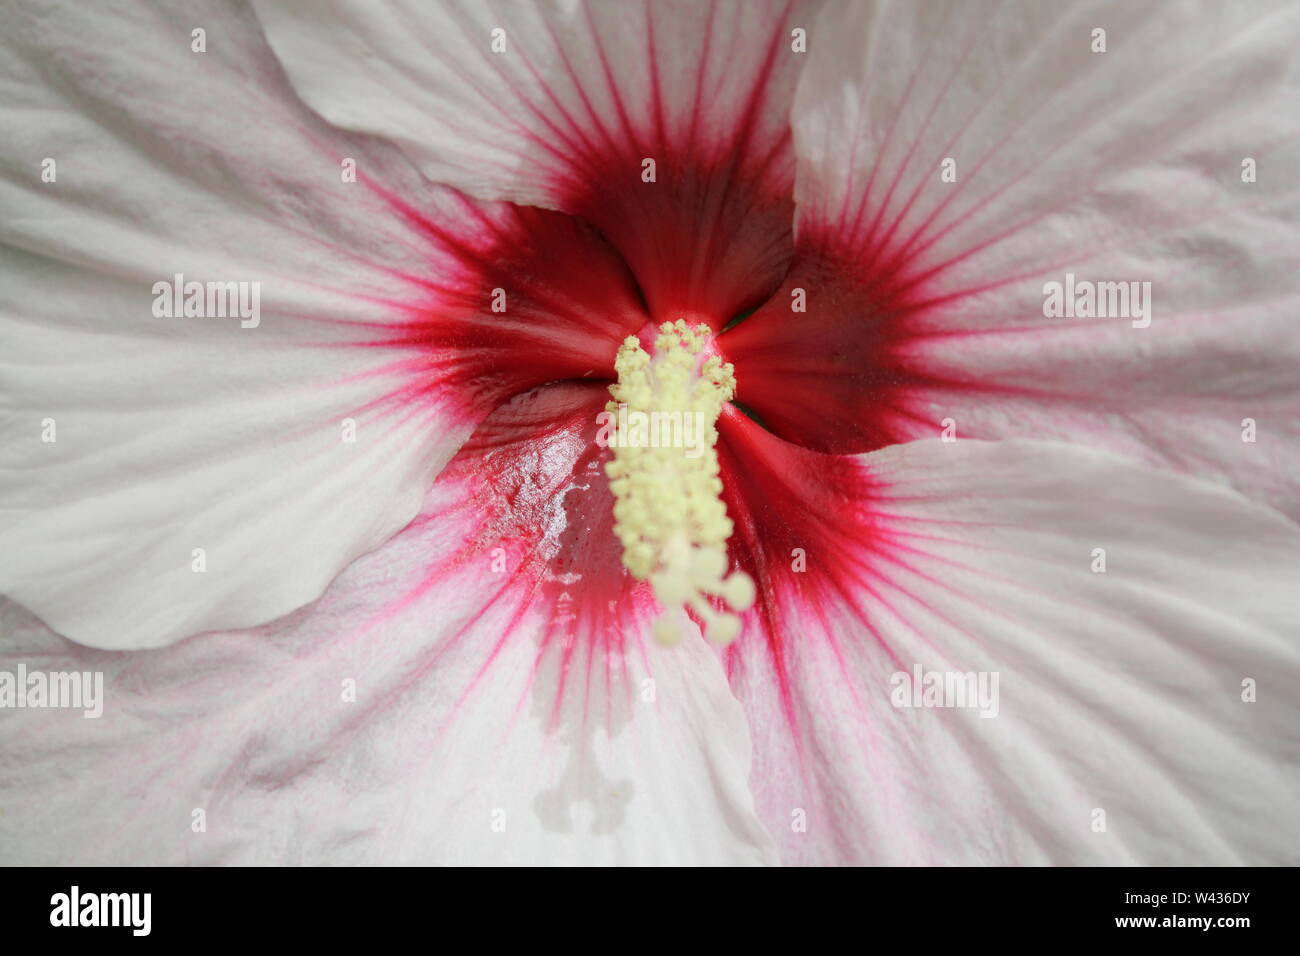 Luna white hibiscus flower blossom with a red eye and in full bloom. Stock Photo